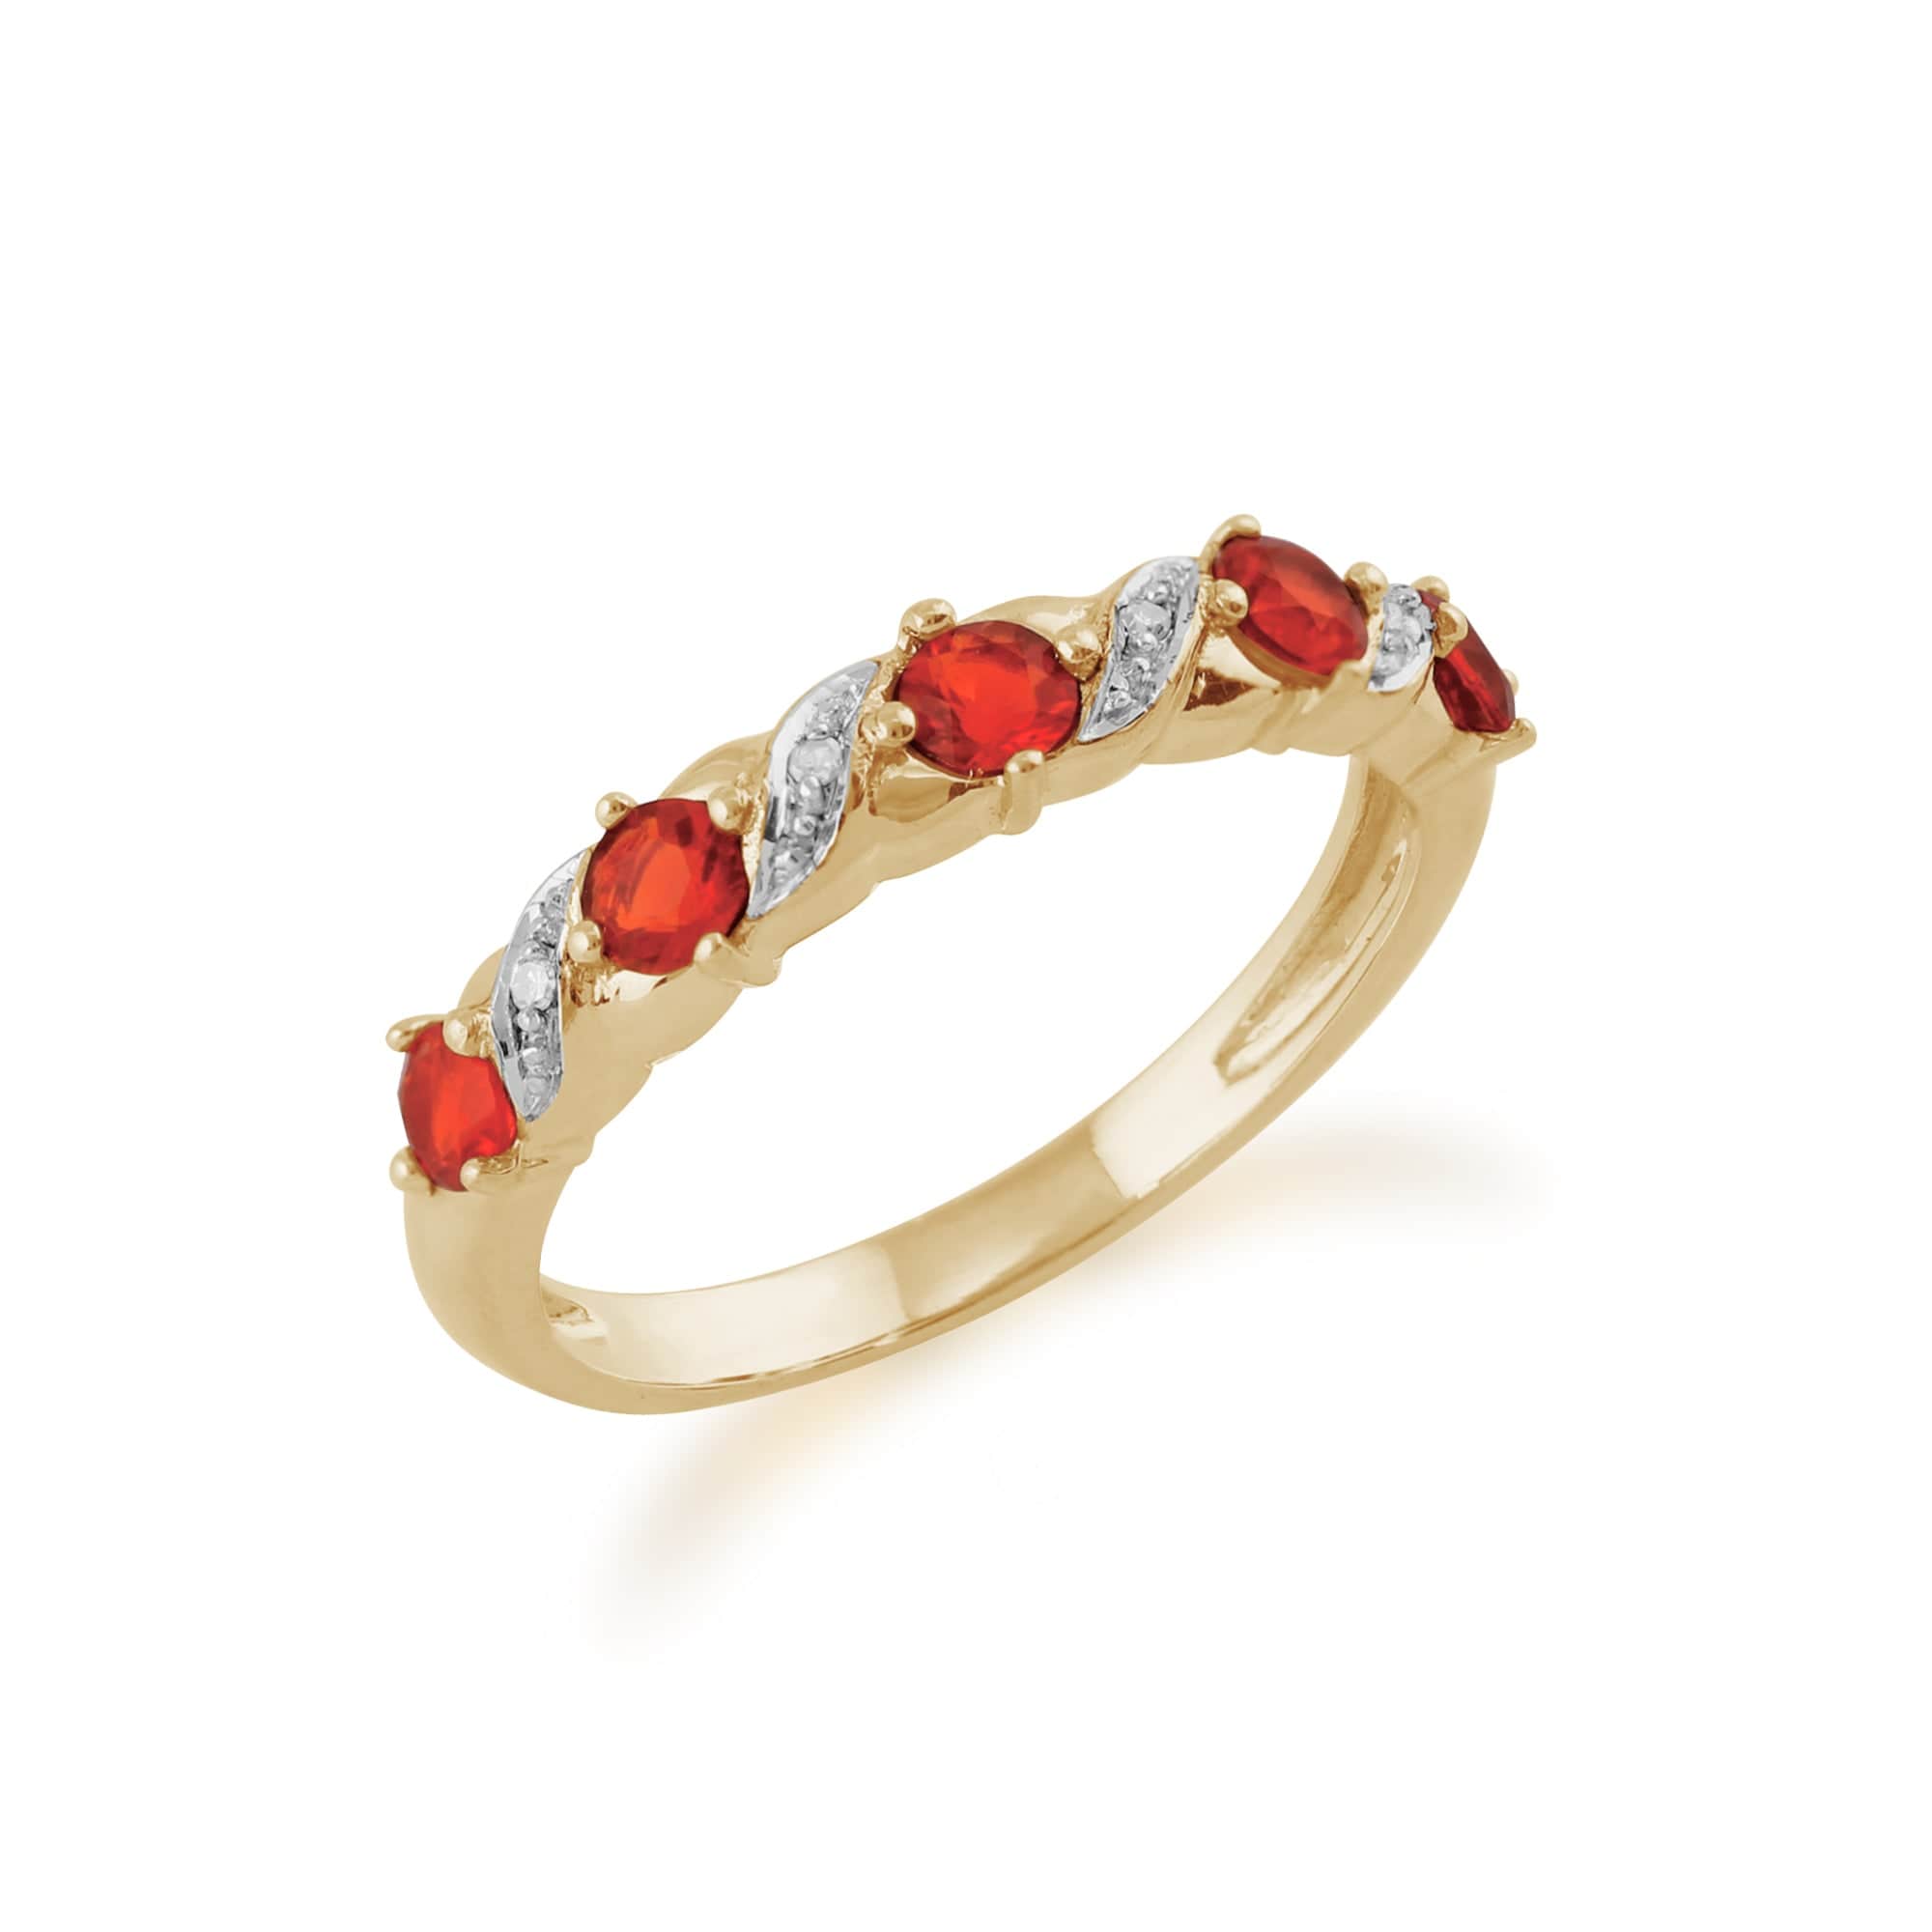 135R0189099 Art Nouveau Style Fire Opal & Diamond Half Eternity Ring in 9ct Yellow Gold 4